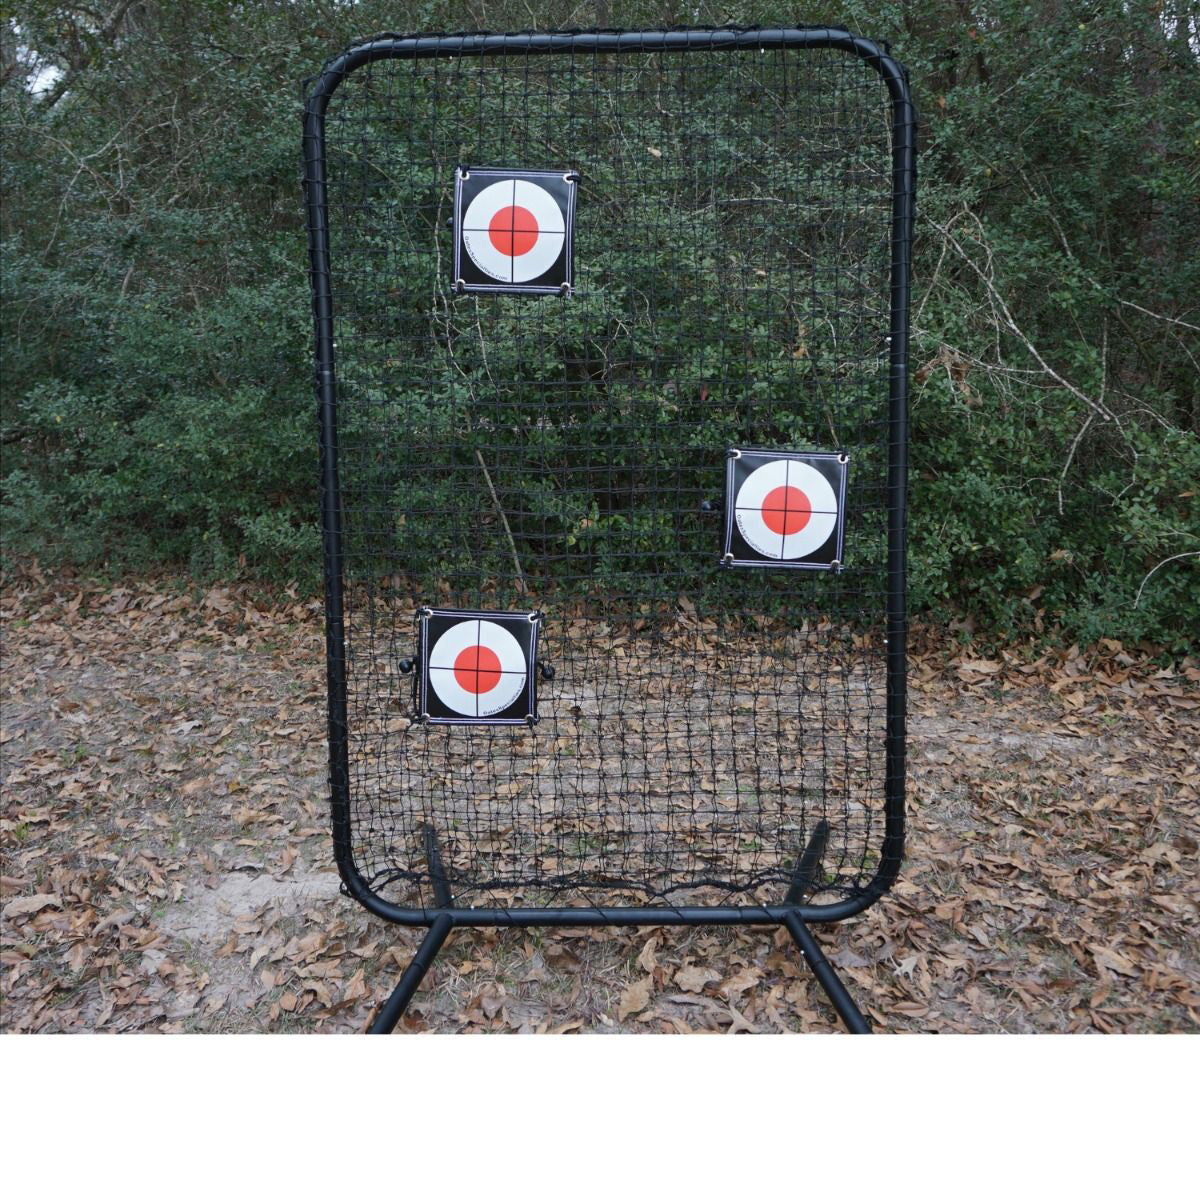 TAP™ Precision Target On Net